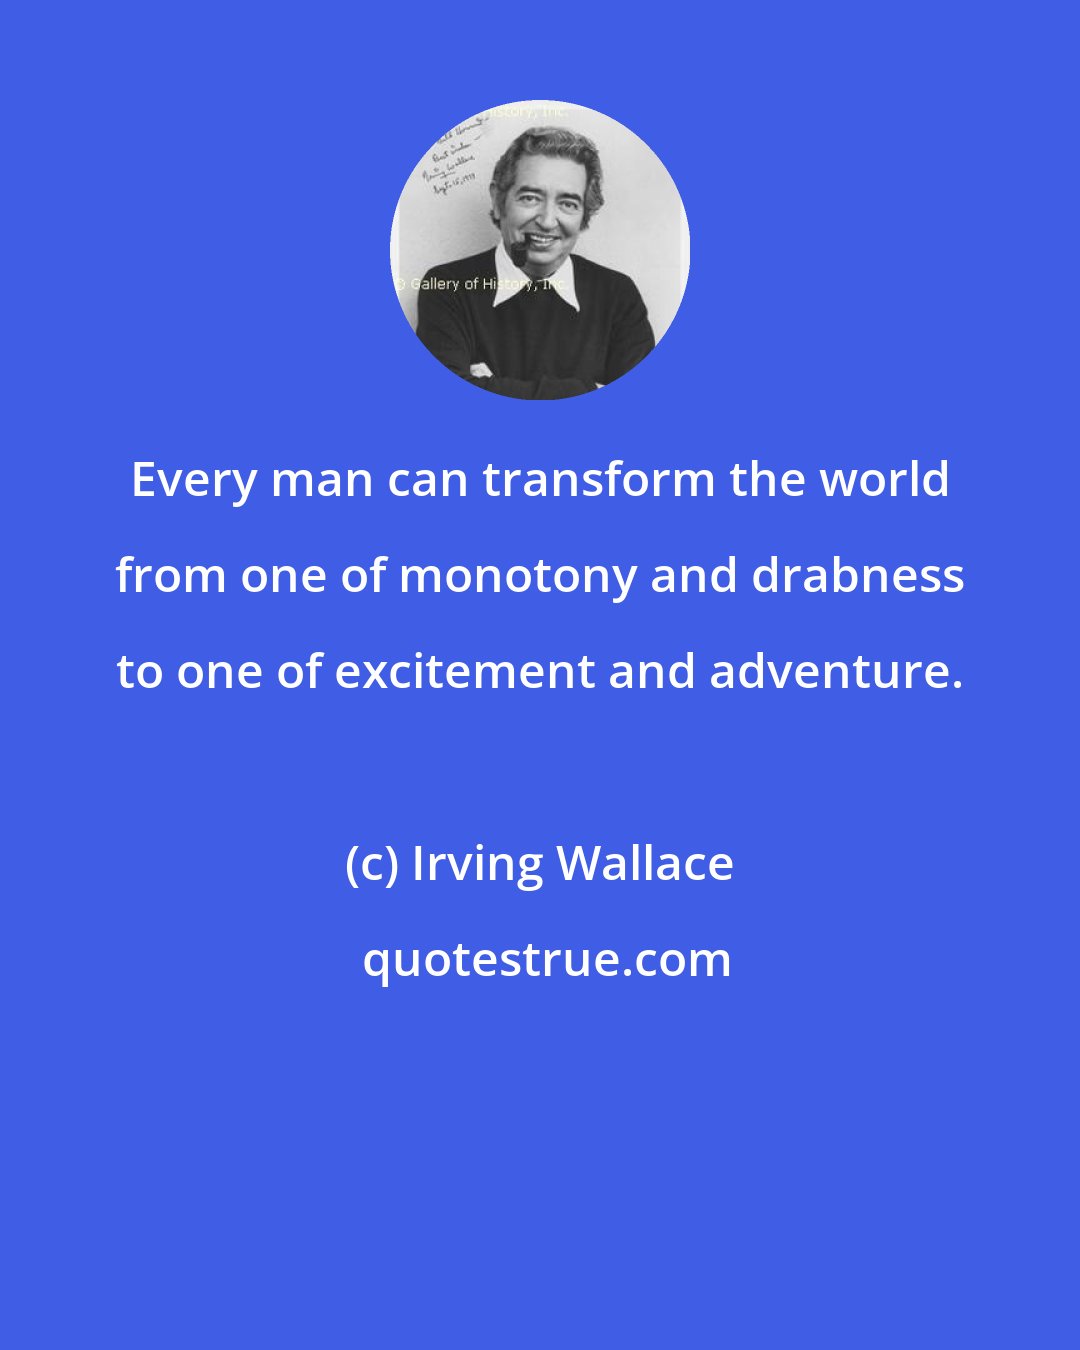 Irving Wallace: Every man can transform the world from one of monotony and drabness to one of excitement and adventure.